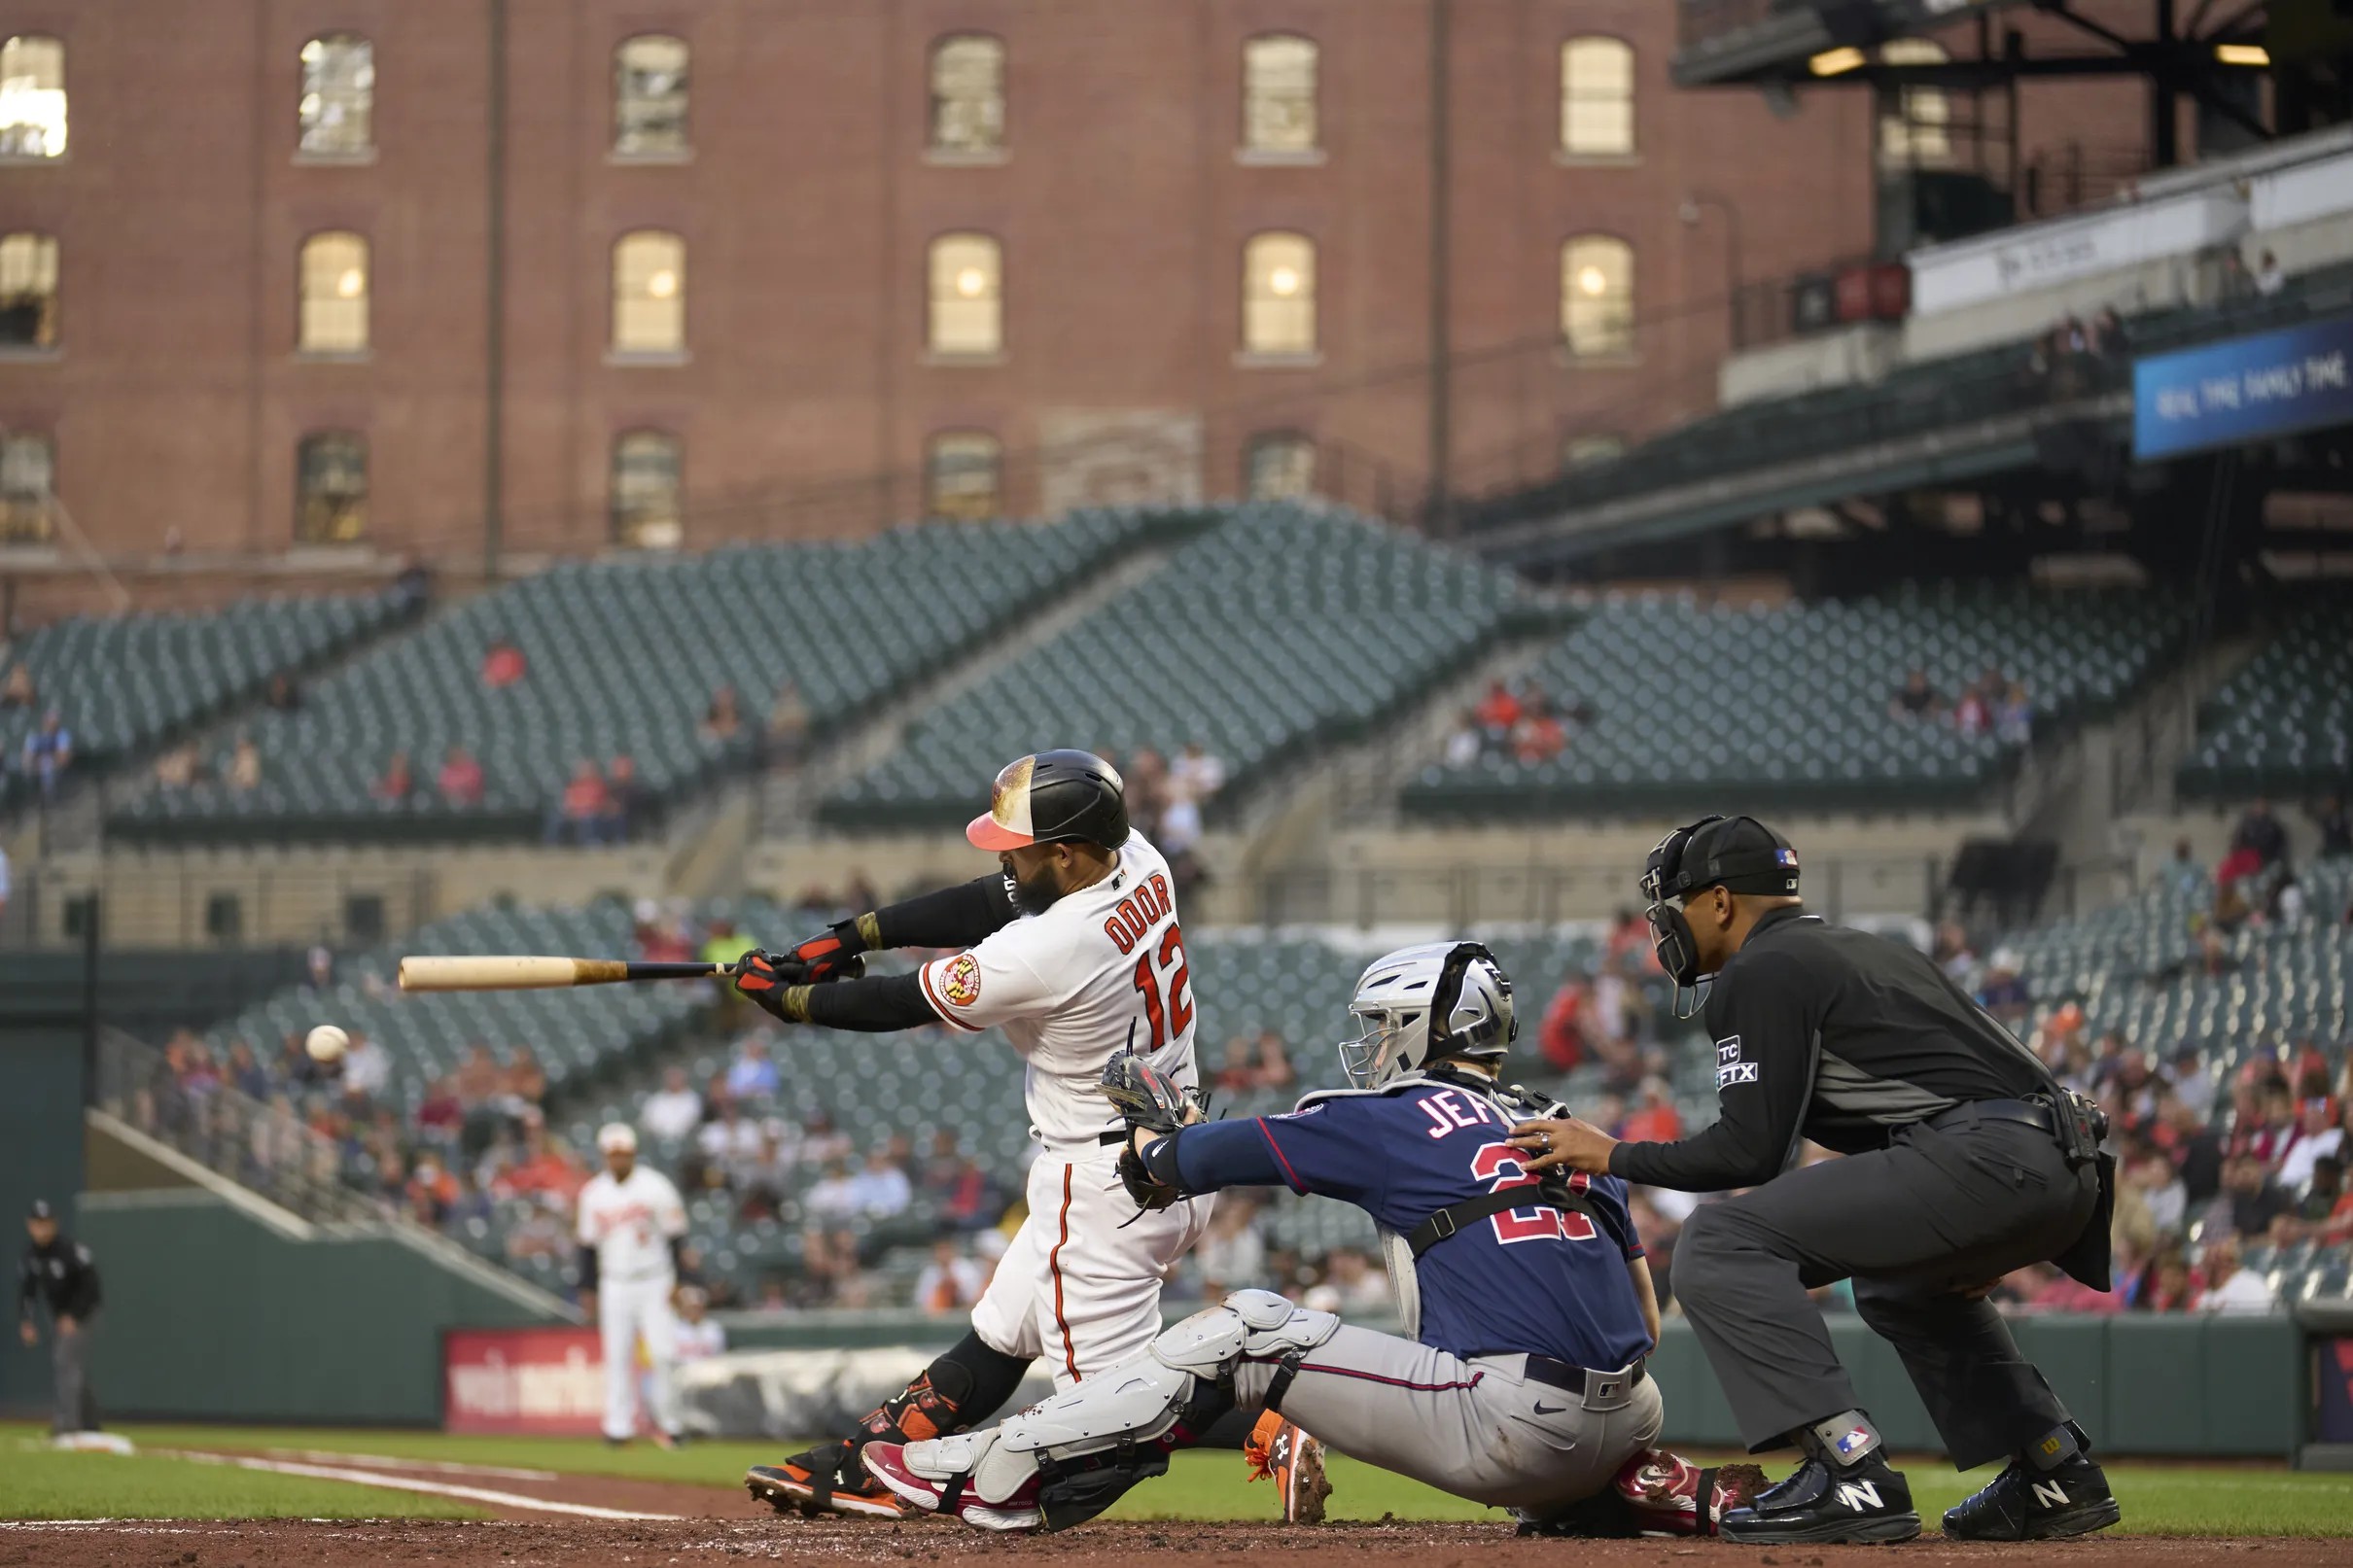 OriolesTwins series preview Fresh off a winning month, the O’s visit